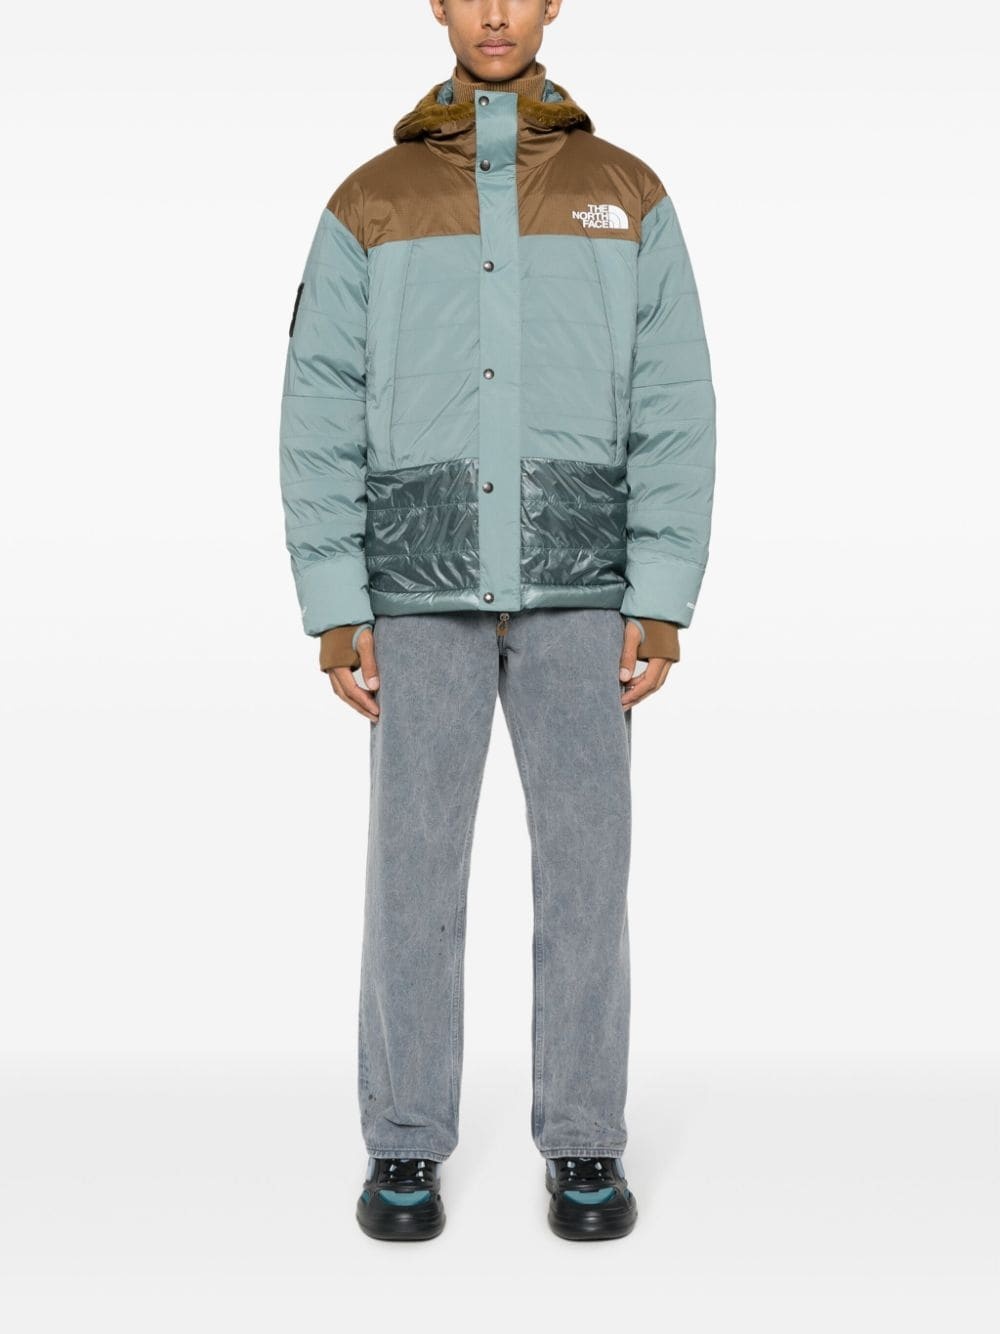 Undercover x The North Face 50/50 Mountain Jacket (NF0A84S3WI7) - 2